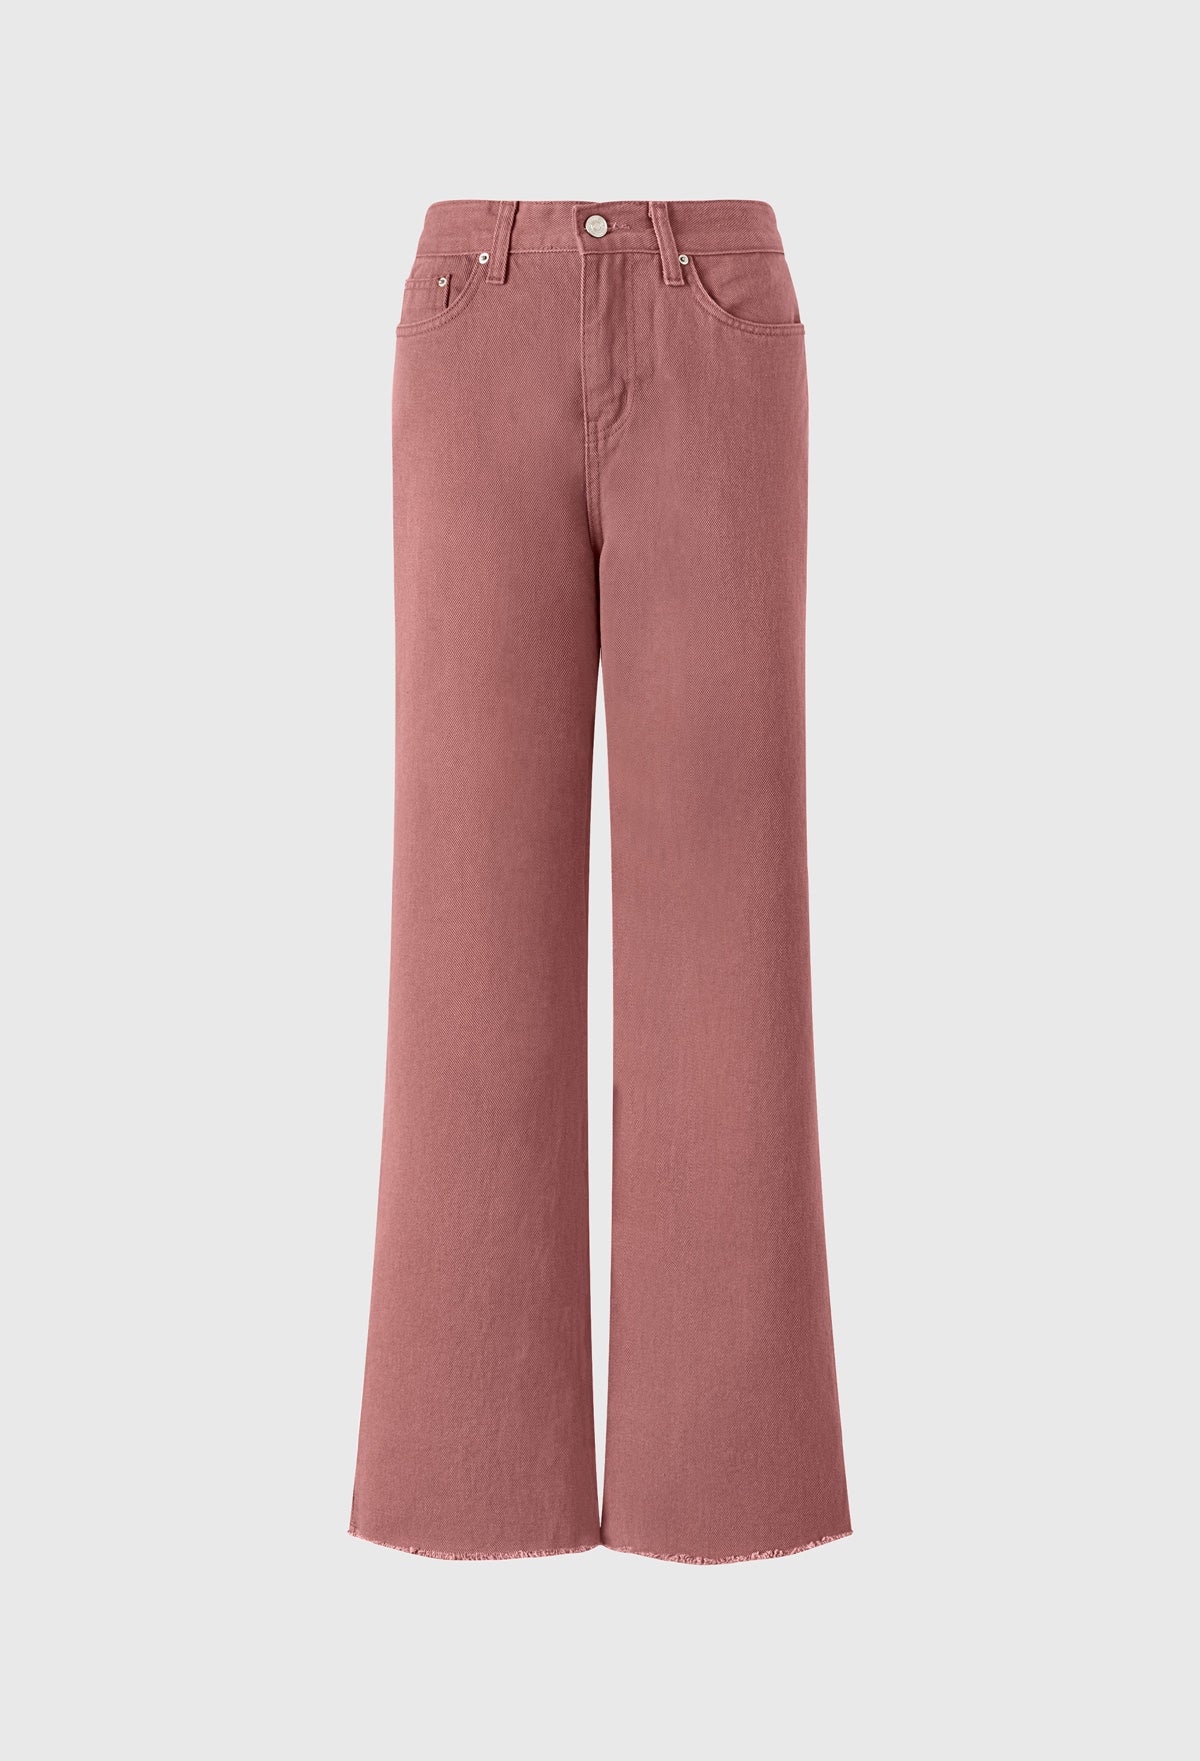 ORR Denim Collection - 771 In Dry Rose